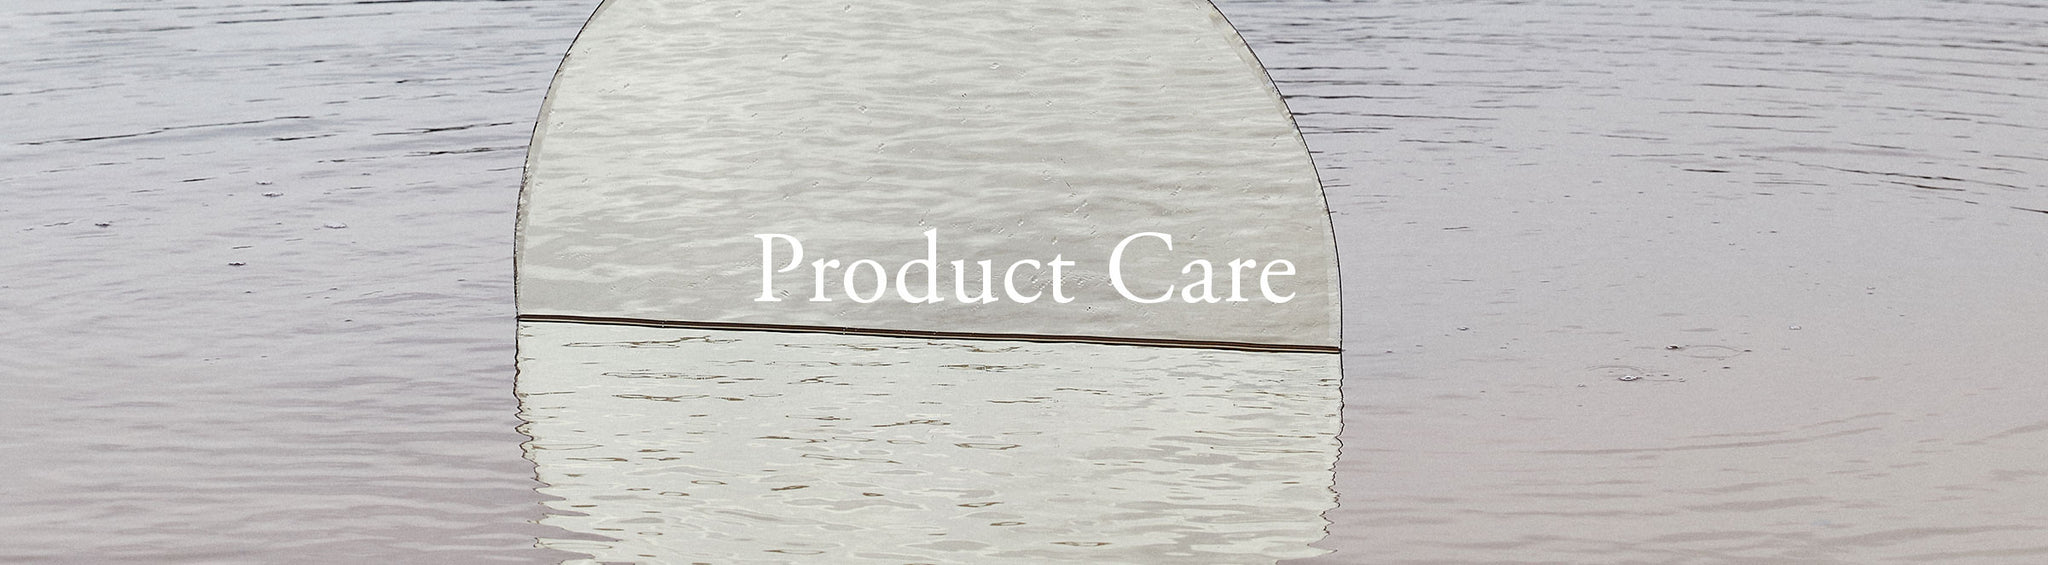 Product Care Header